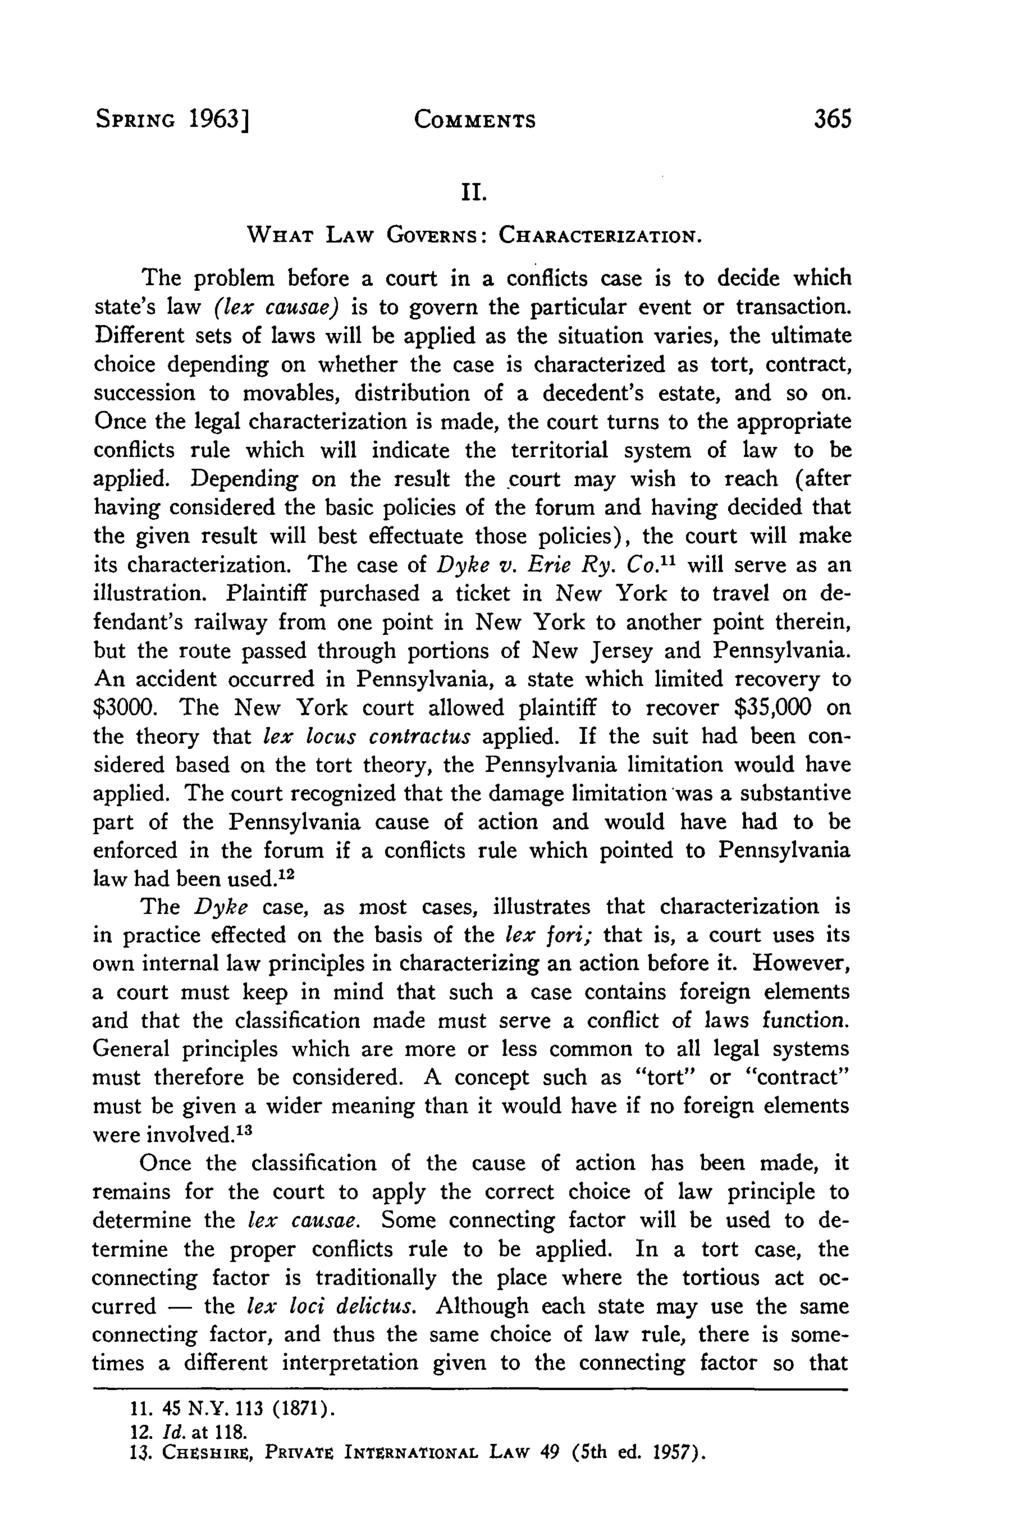 Villanova Law Review, Vol. 8, Iss. 3 [1963], Art. 3 SPRING 1963] COMMENTS II. WHAT LAW GOVERNS: CHARACTERIZATION.